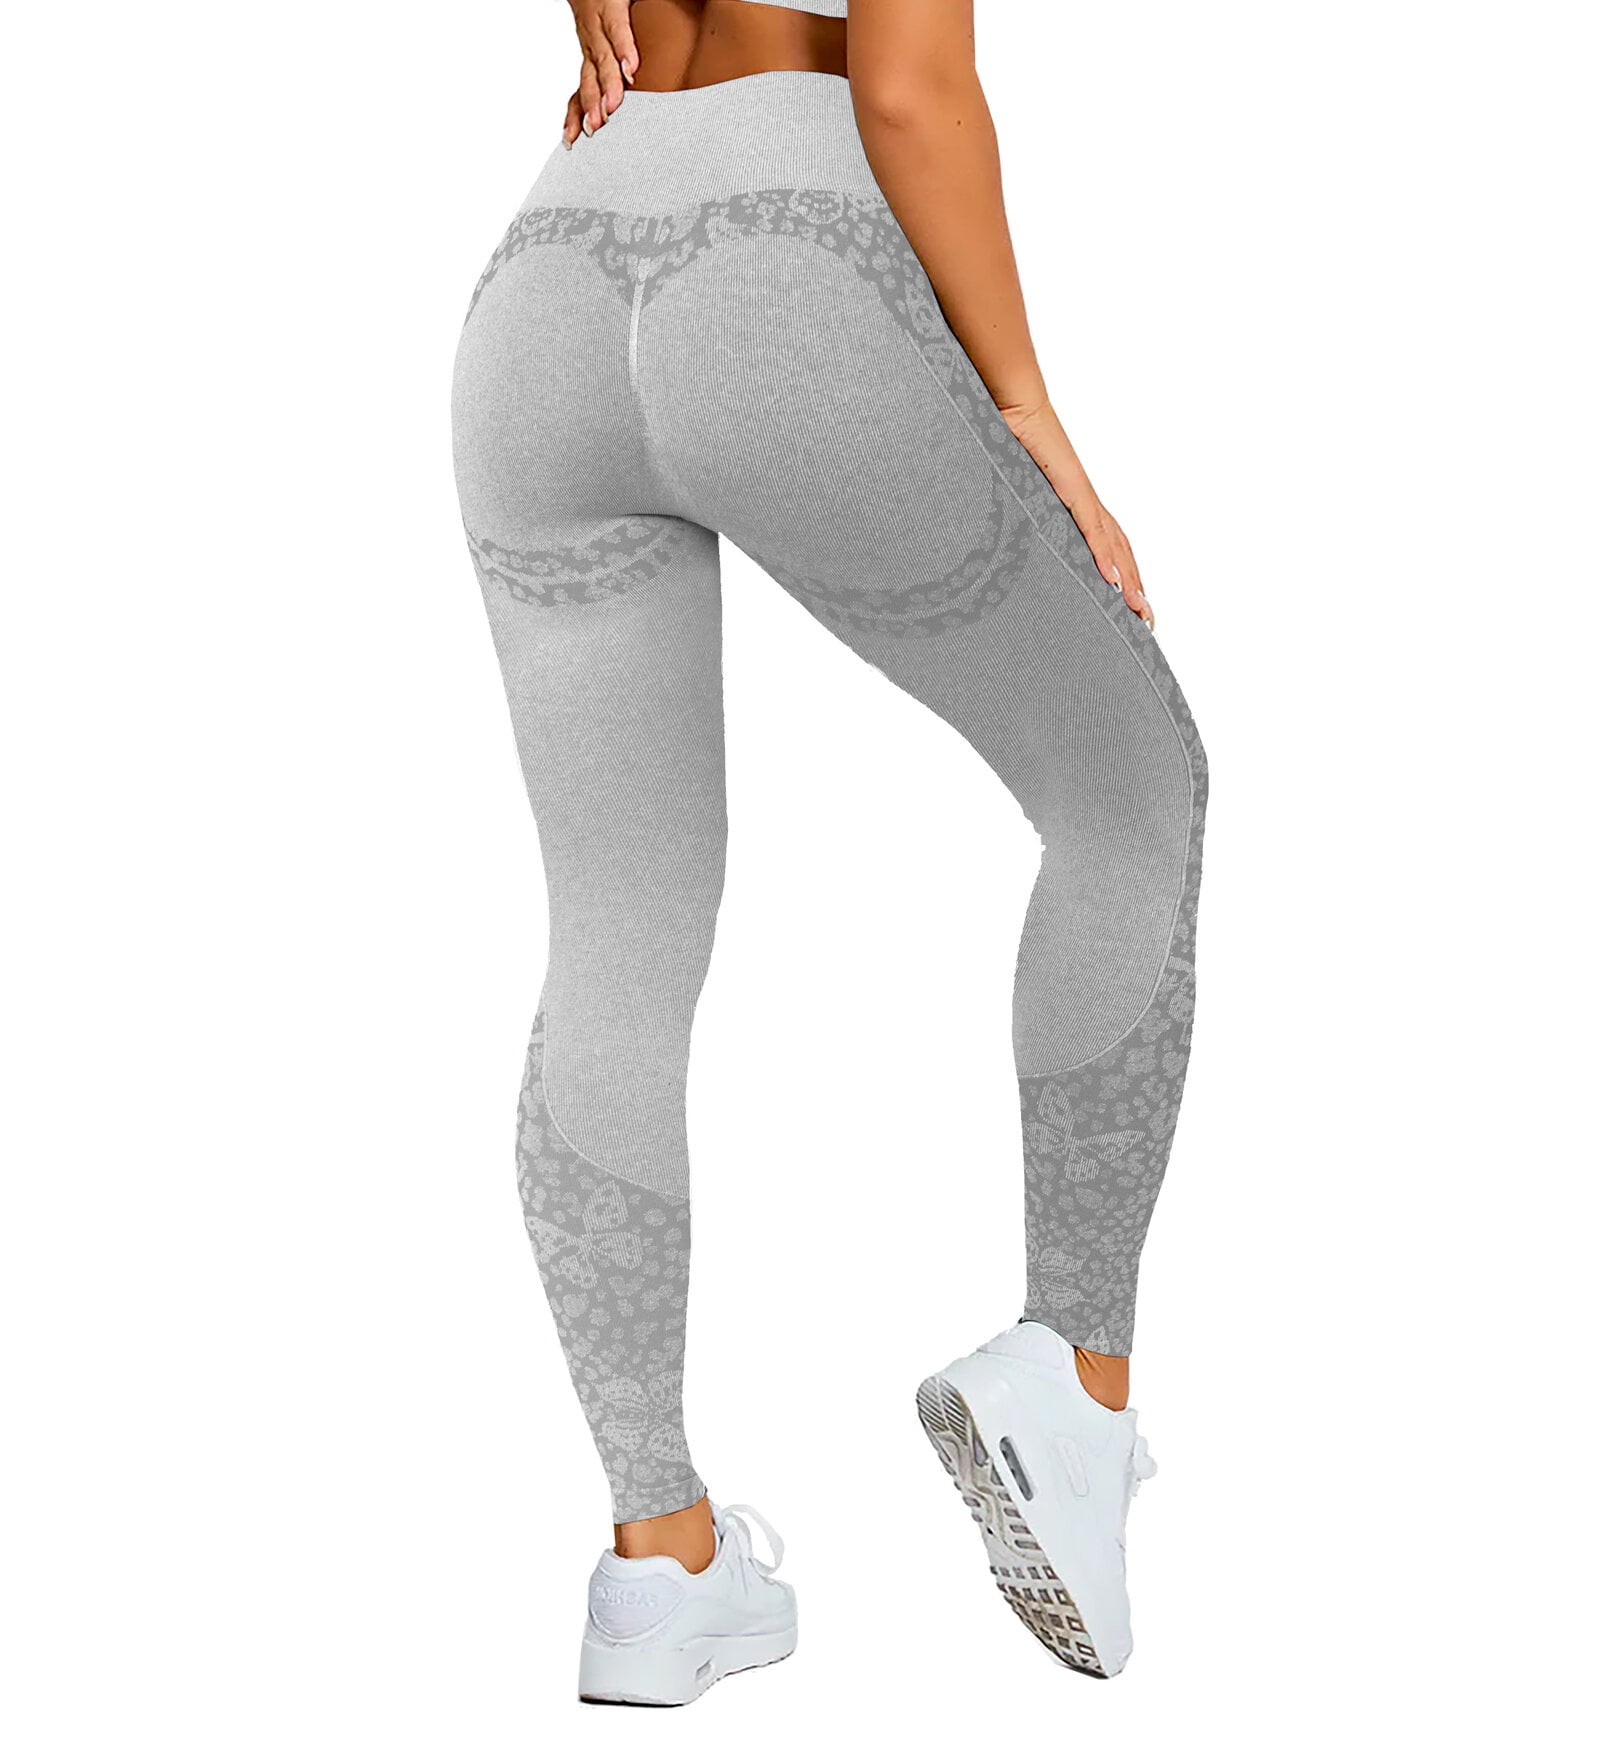 Butt Lifting Leggings with Pockets Gym Workout Leggings Women